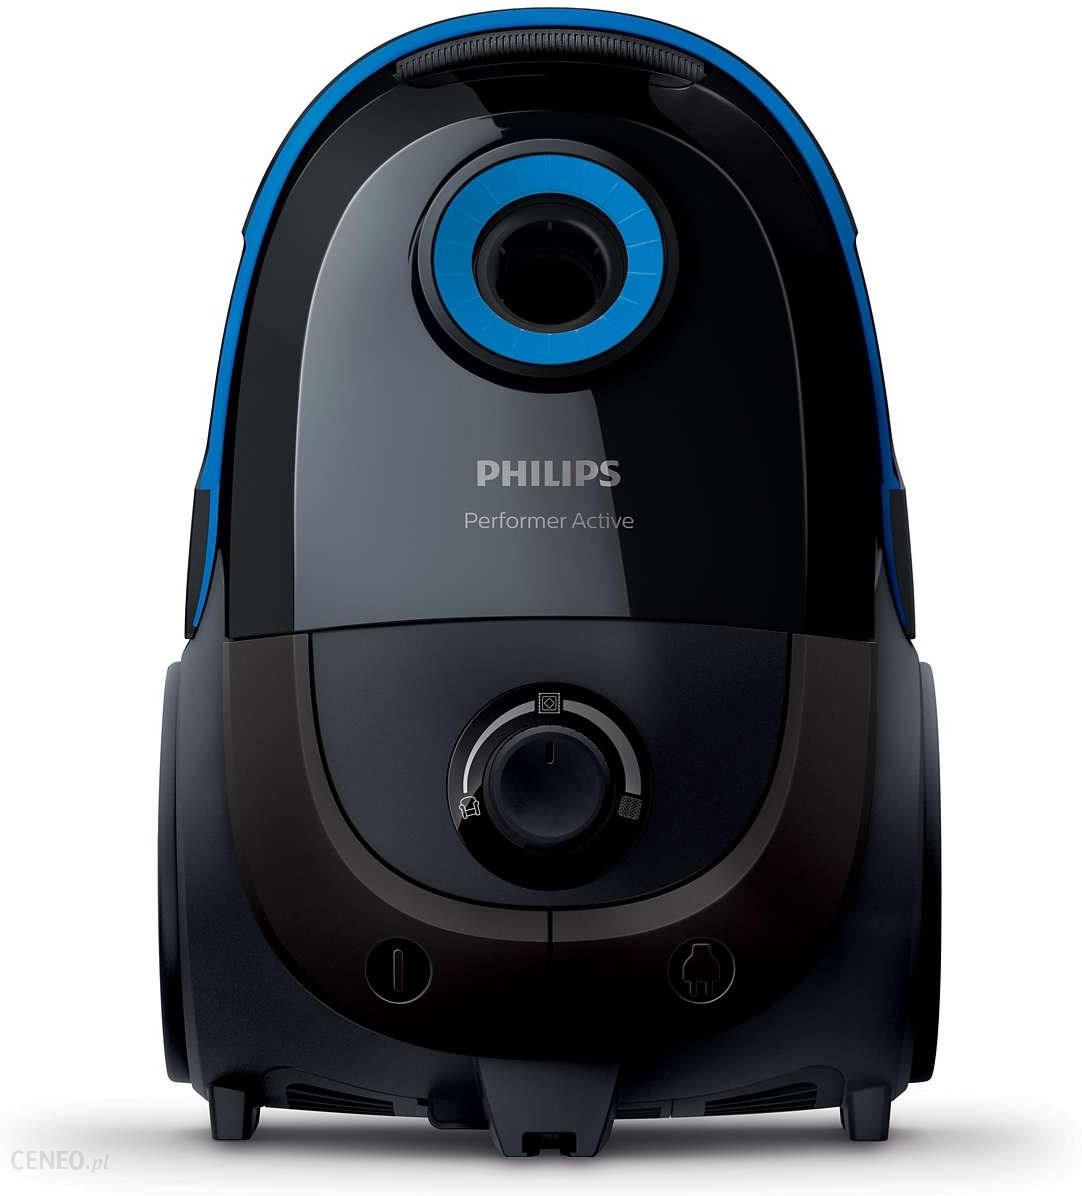 PHILIPS Performer Active FC8578/09